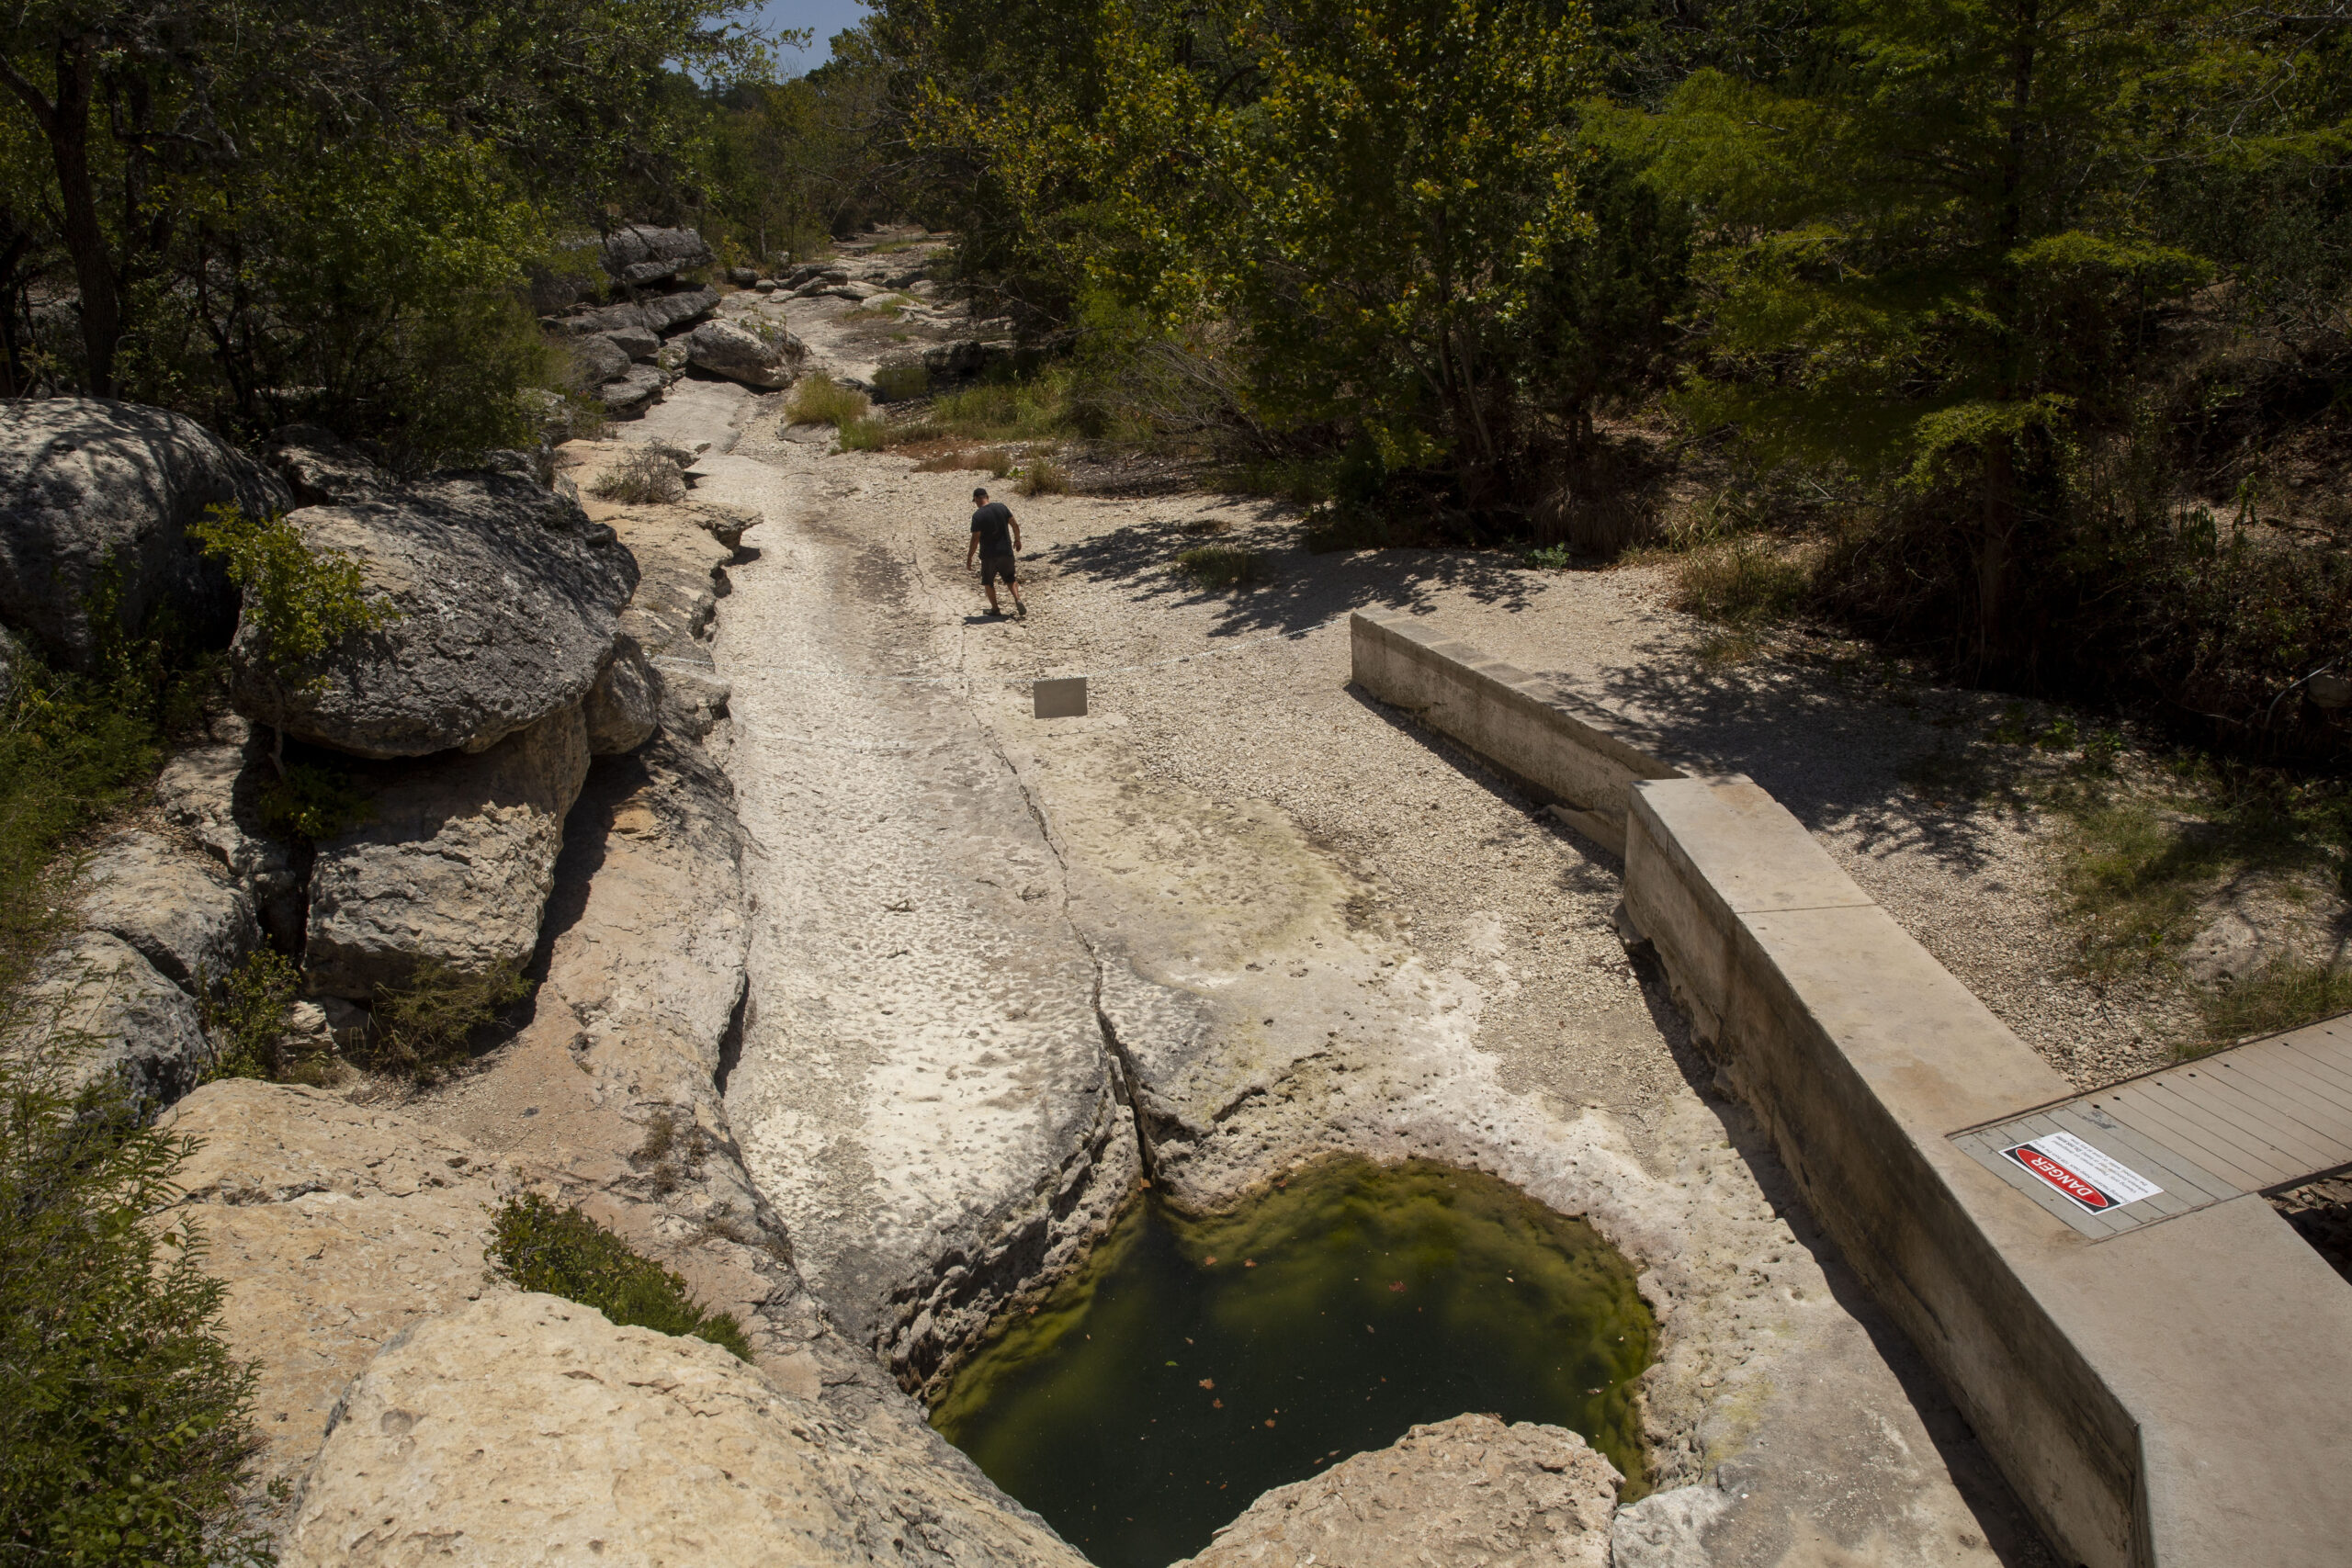 A lonely figure stands in a dry spring bed, usually full of gushing fresh water. There are drought-struck trees all around the "well" of Jacob's Well.